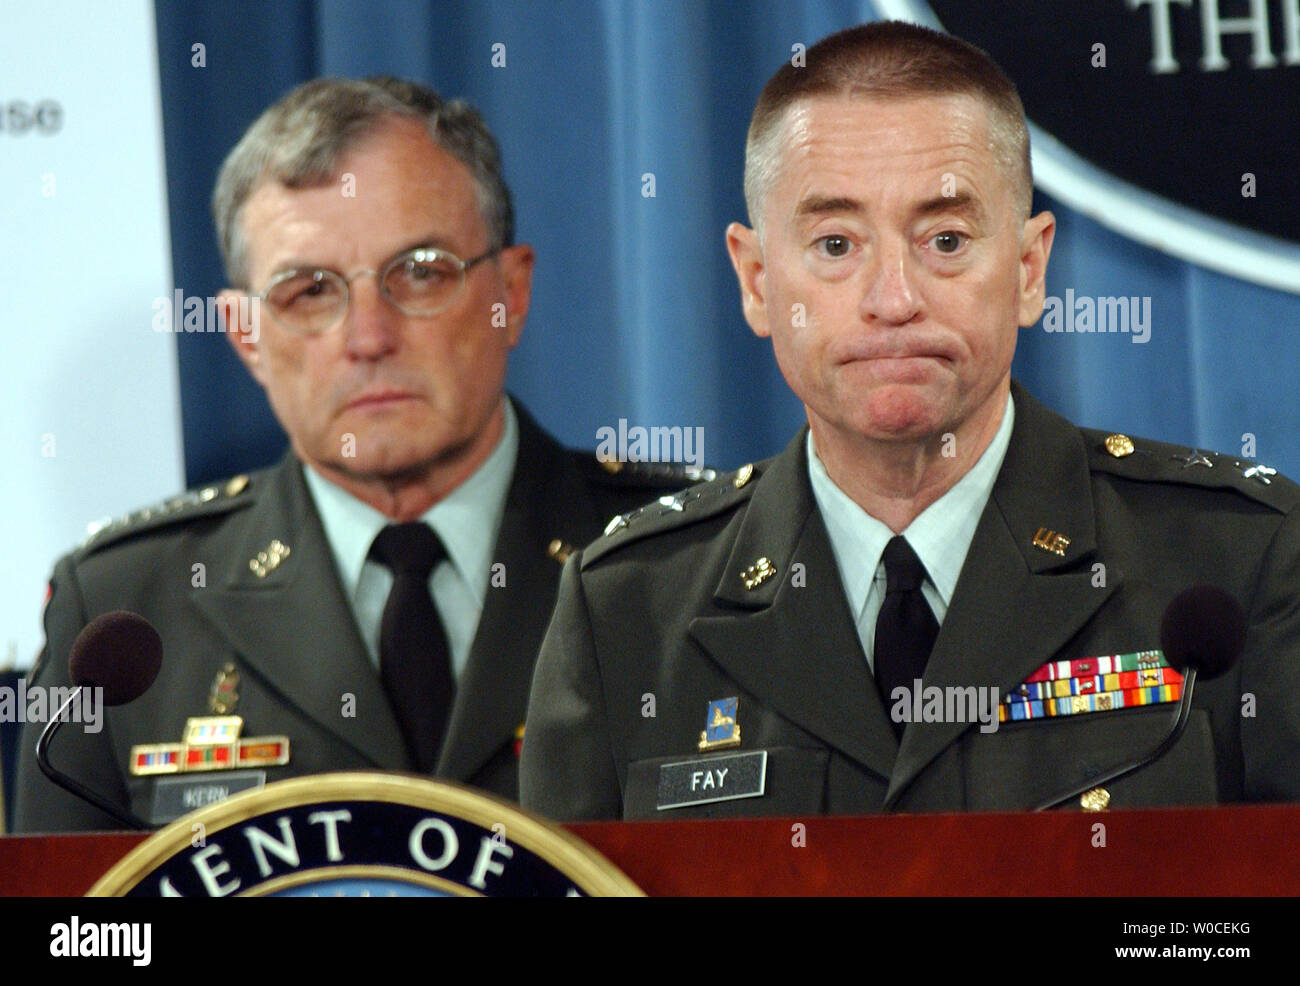 Gen. Paul Kern, left, and Maj. Gen. George Fay answer questions from reporters about abuse at the Abu Ghraib prison in Iraq during a news conference at the Pentagon on Aug. 25, 2004, in Arlington, Va. The Defense Department investigation found that less than 50 individuals were to blame for the abuses, but that officers above them in the chain of command made errors that led to the conditions that resulted in the abuses.  (UPI Photo/Roger L. Wollenberg) Stock Photo